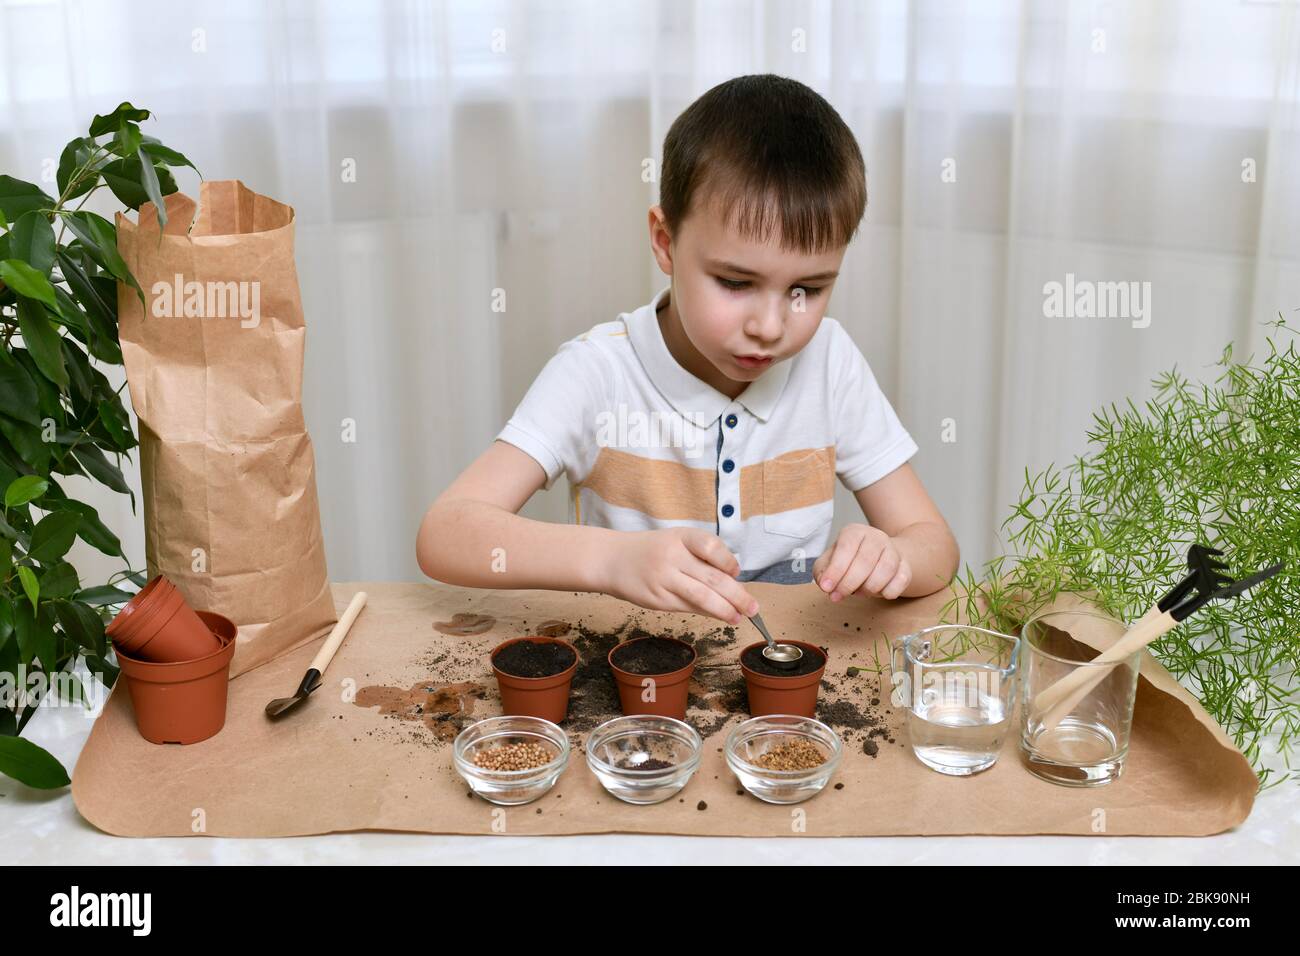 Planting micro greens seeds in pots. The emotional boy focused over laying seeds in pots with tweezers through funnel. Stock Photo